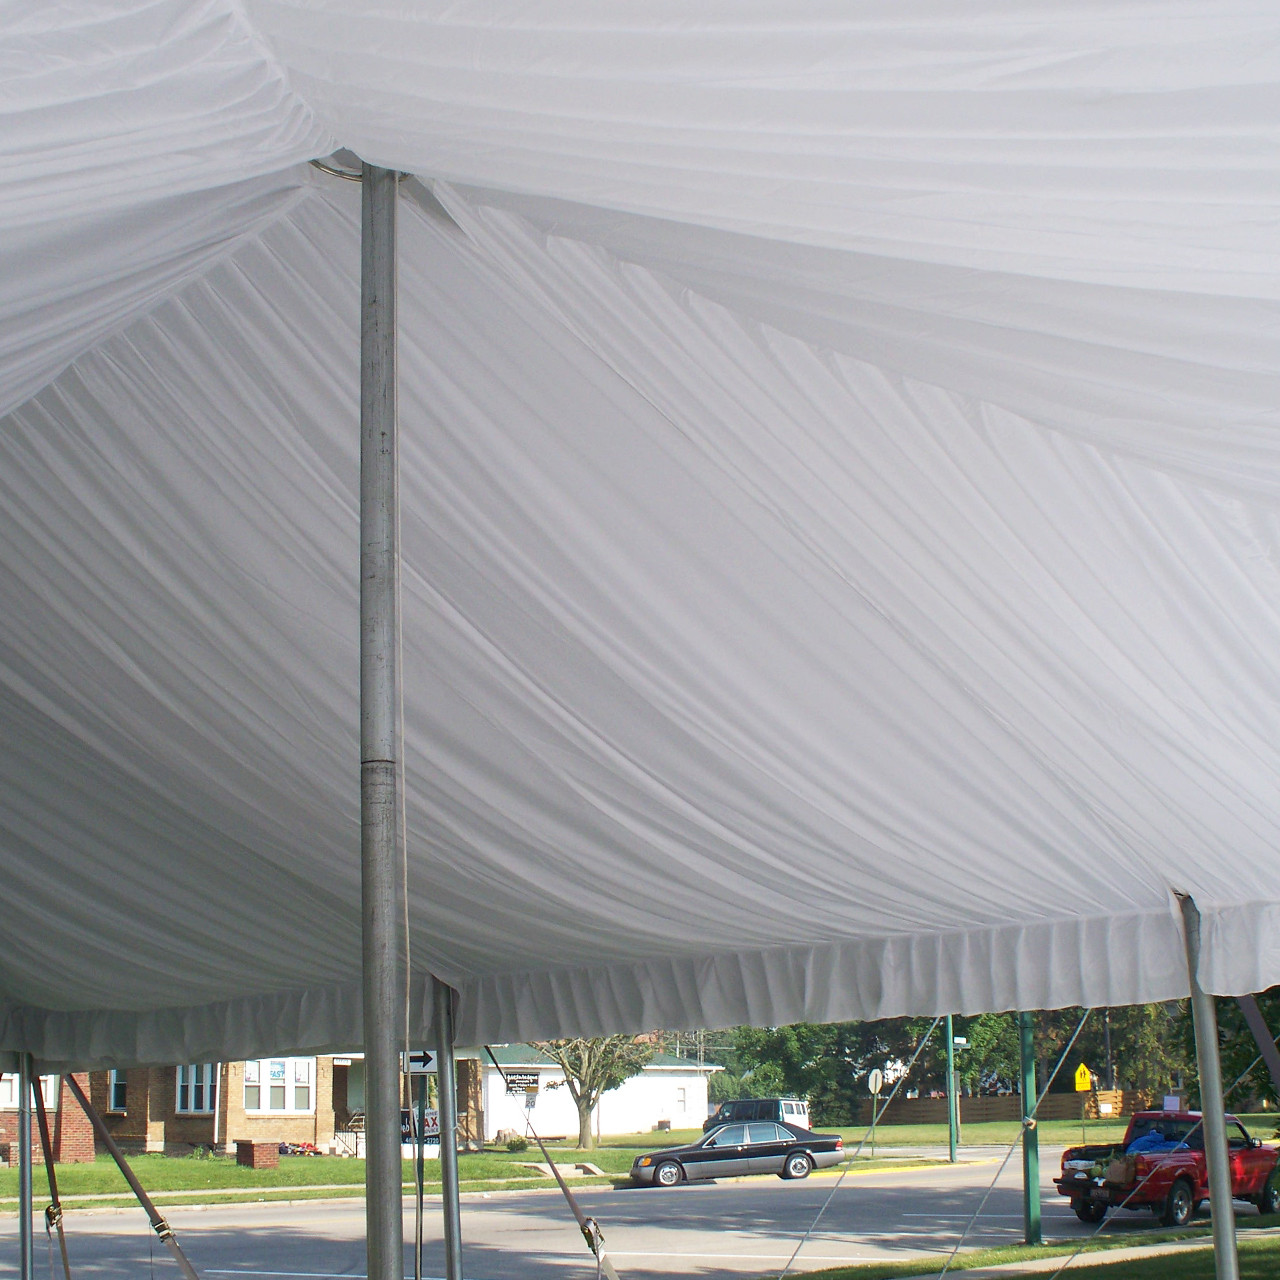 High quality Hi-Pro pole tent liner adding a rich look to the event.